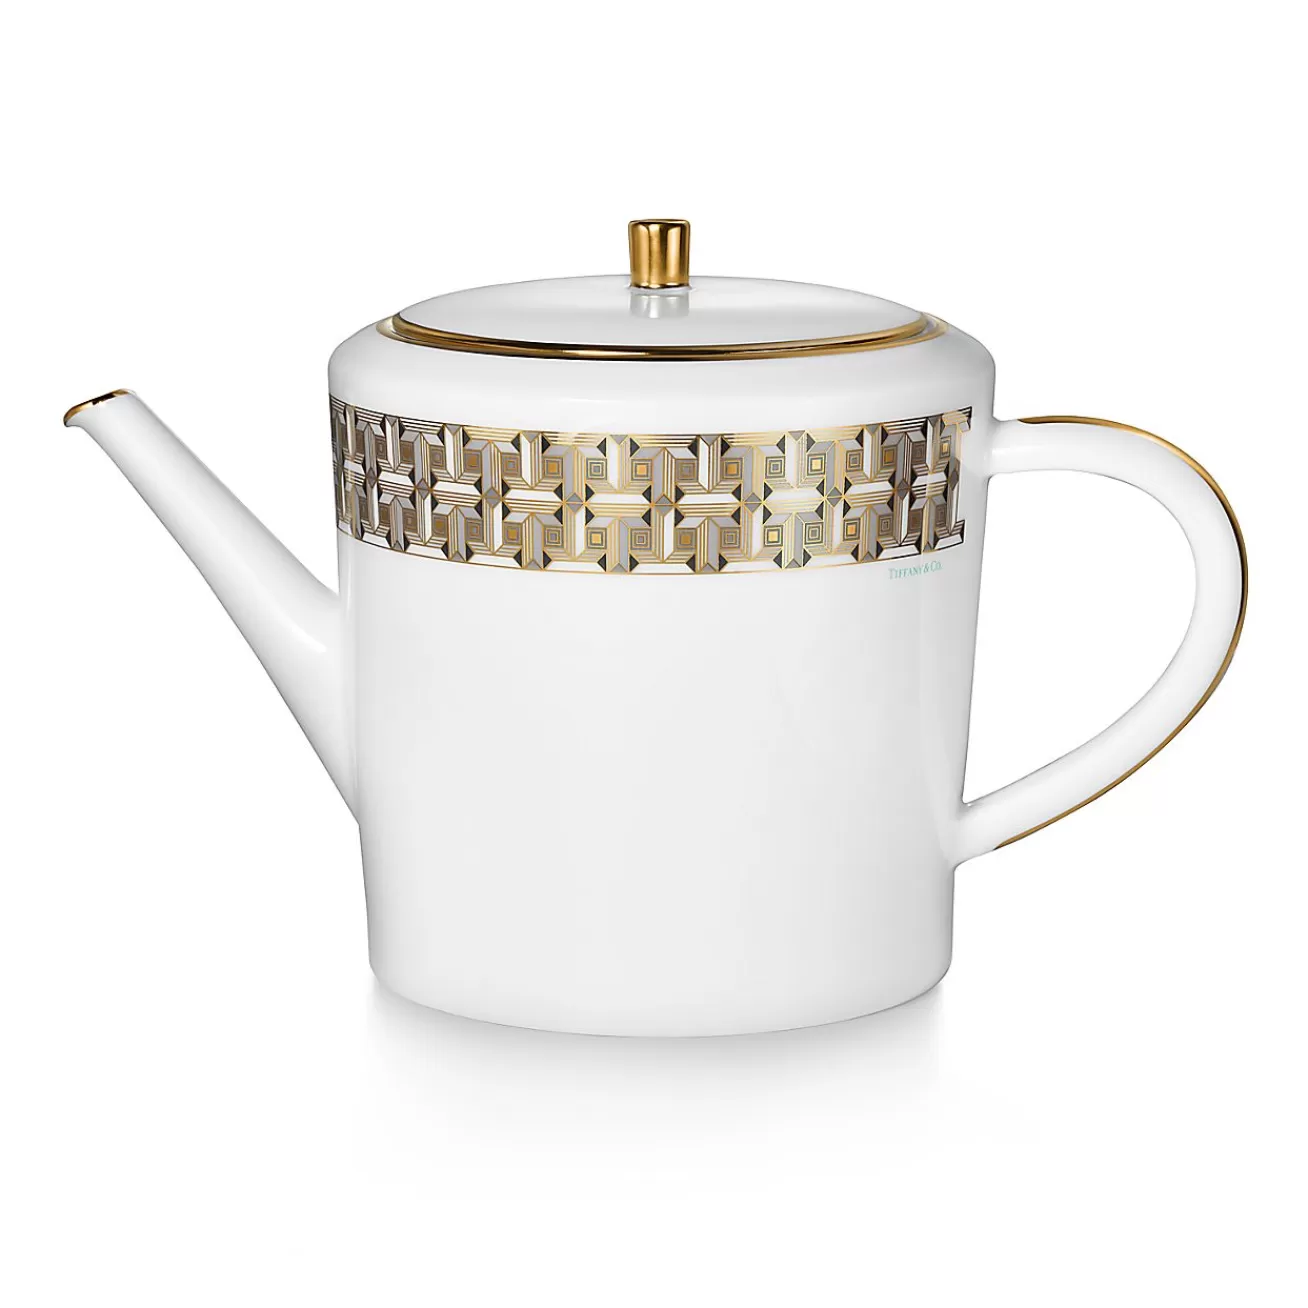 Tiffany & Co. Black Tiffany T True Teapot with a Hand-painted Gold Rim | ^ Tableware | Coffee & Tea